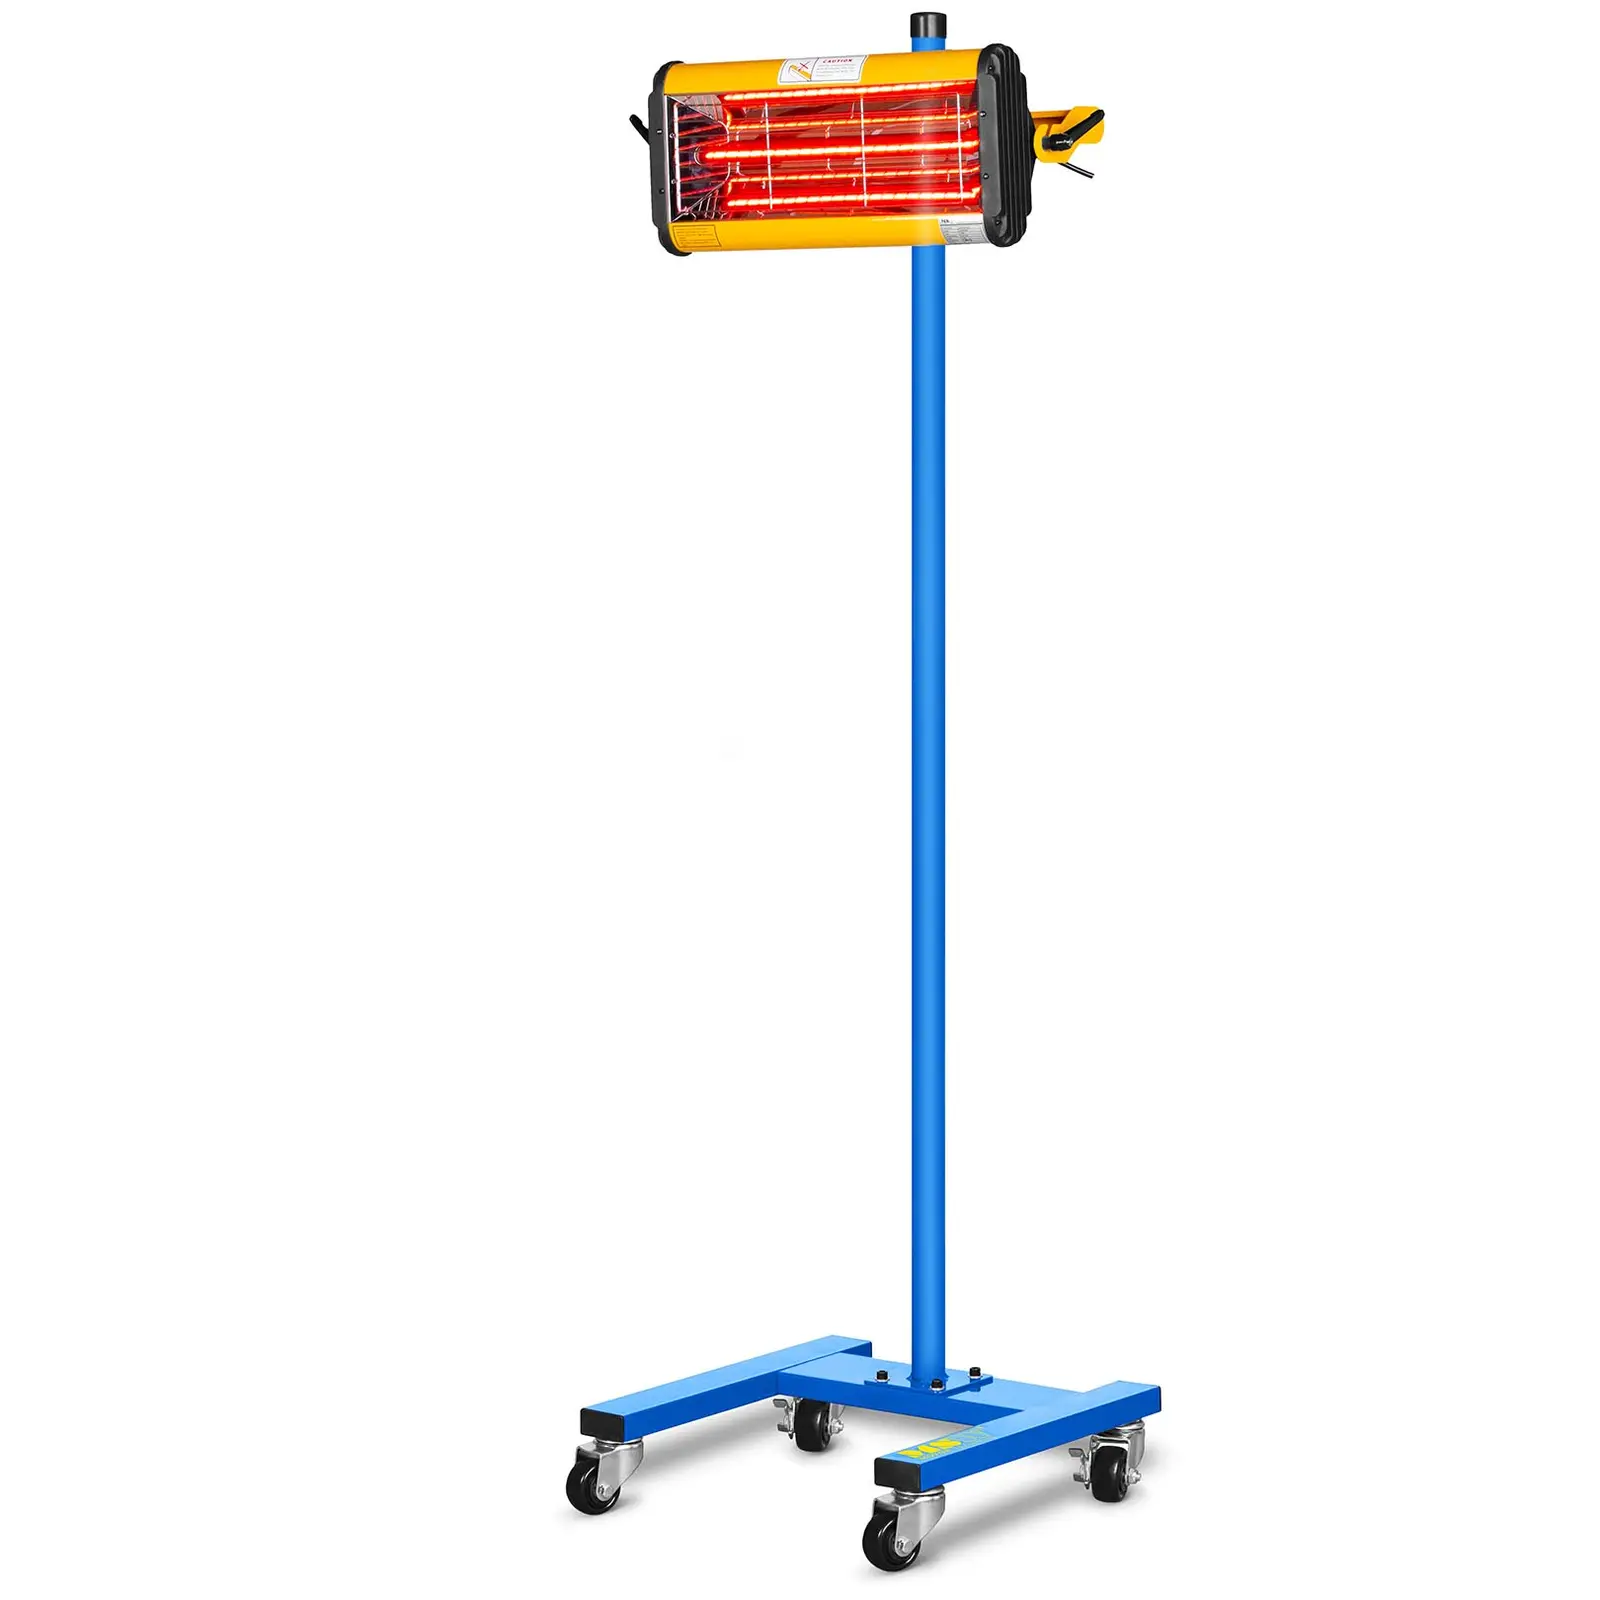 Infrared Paint Dryer - 1,100 W - 1 lamp